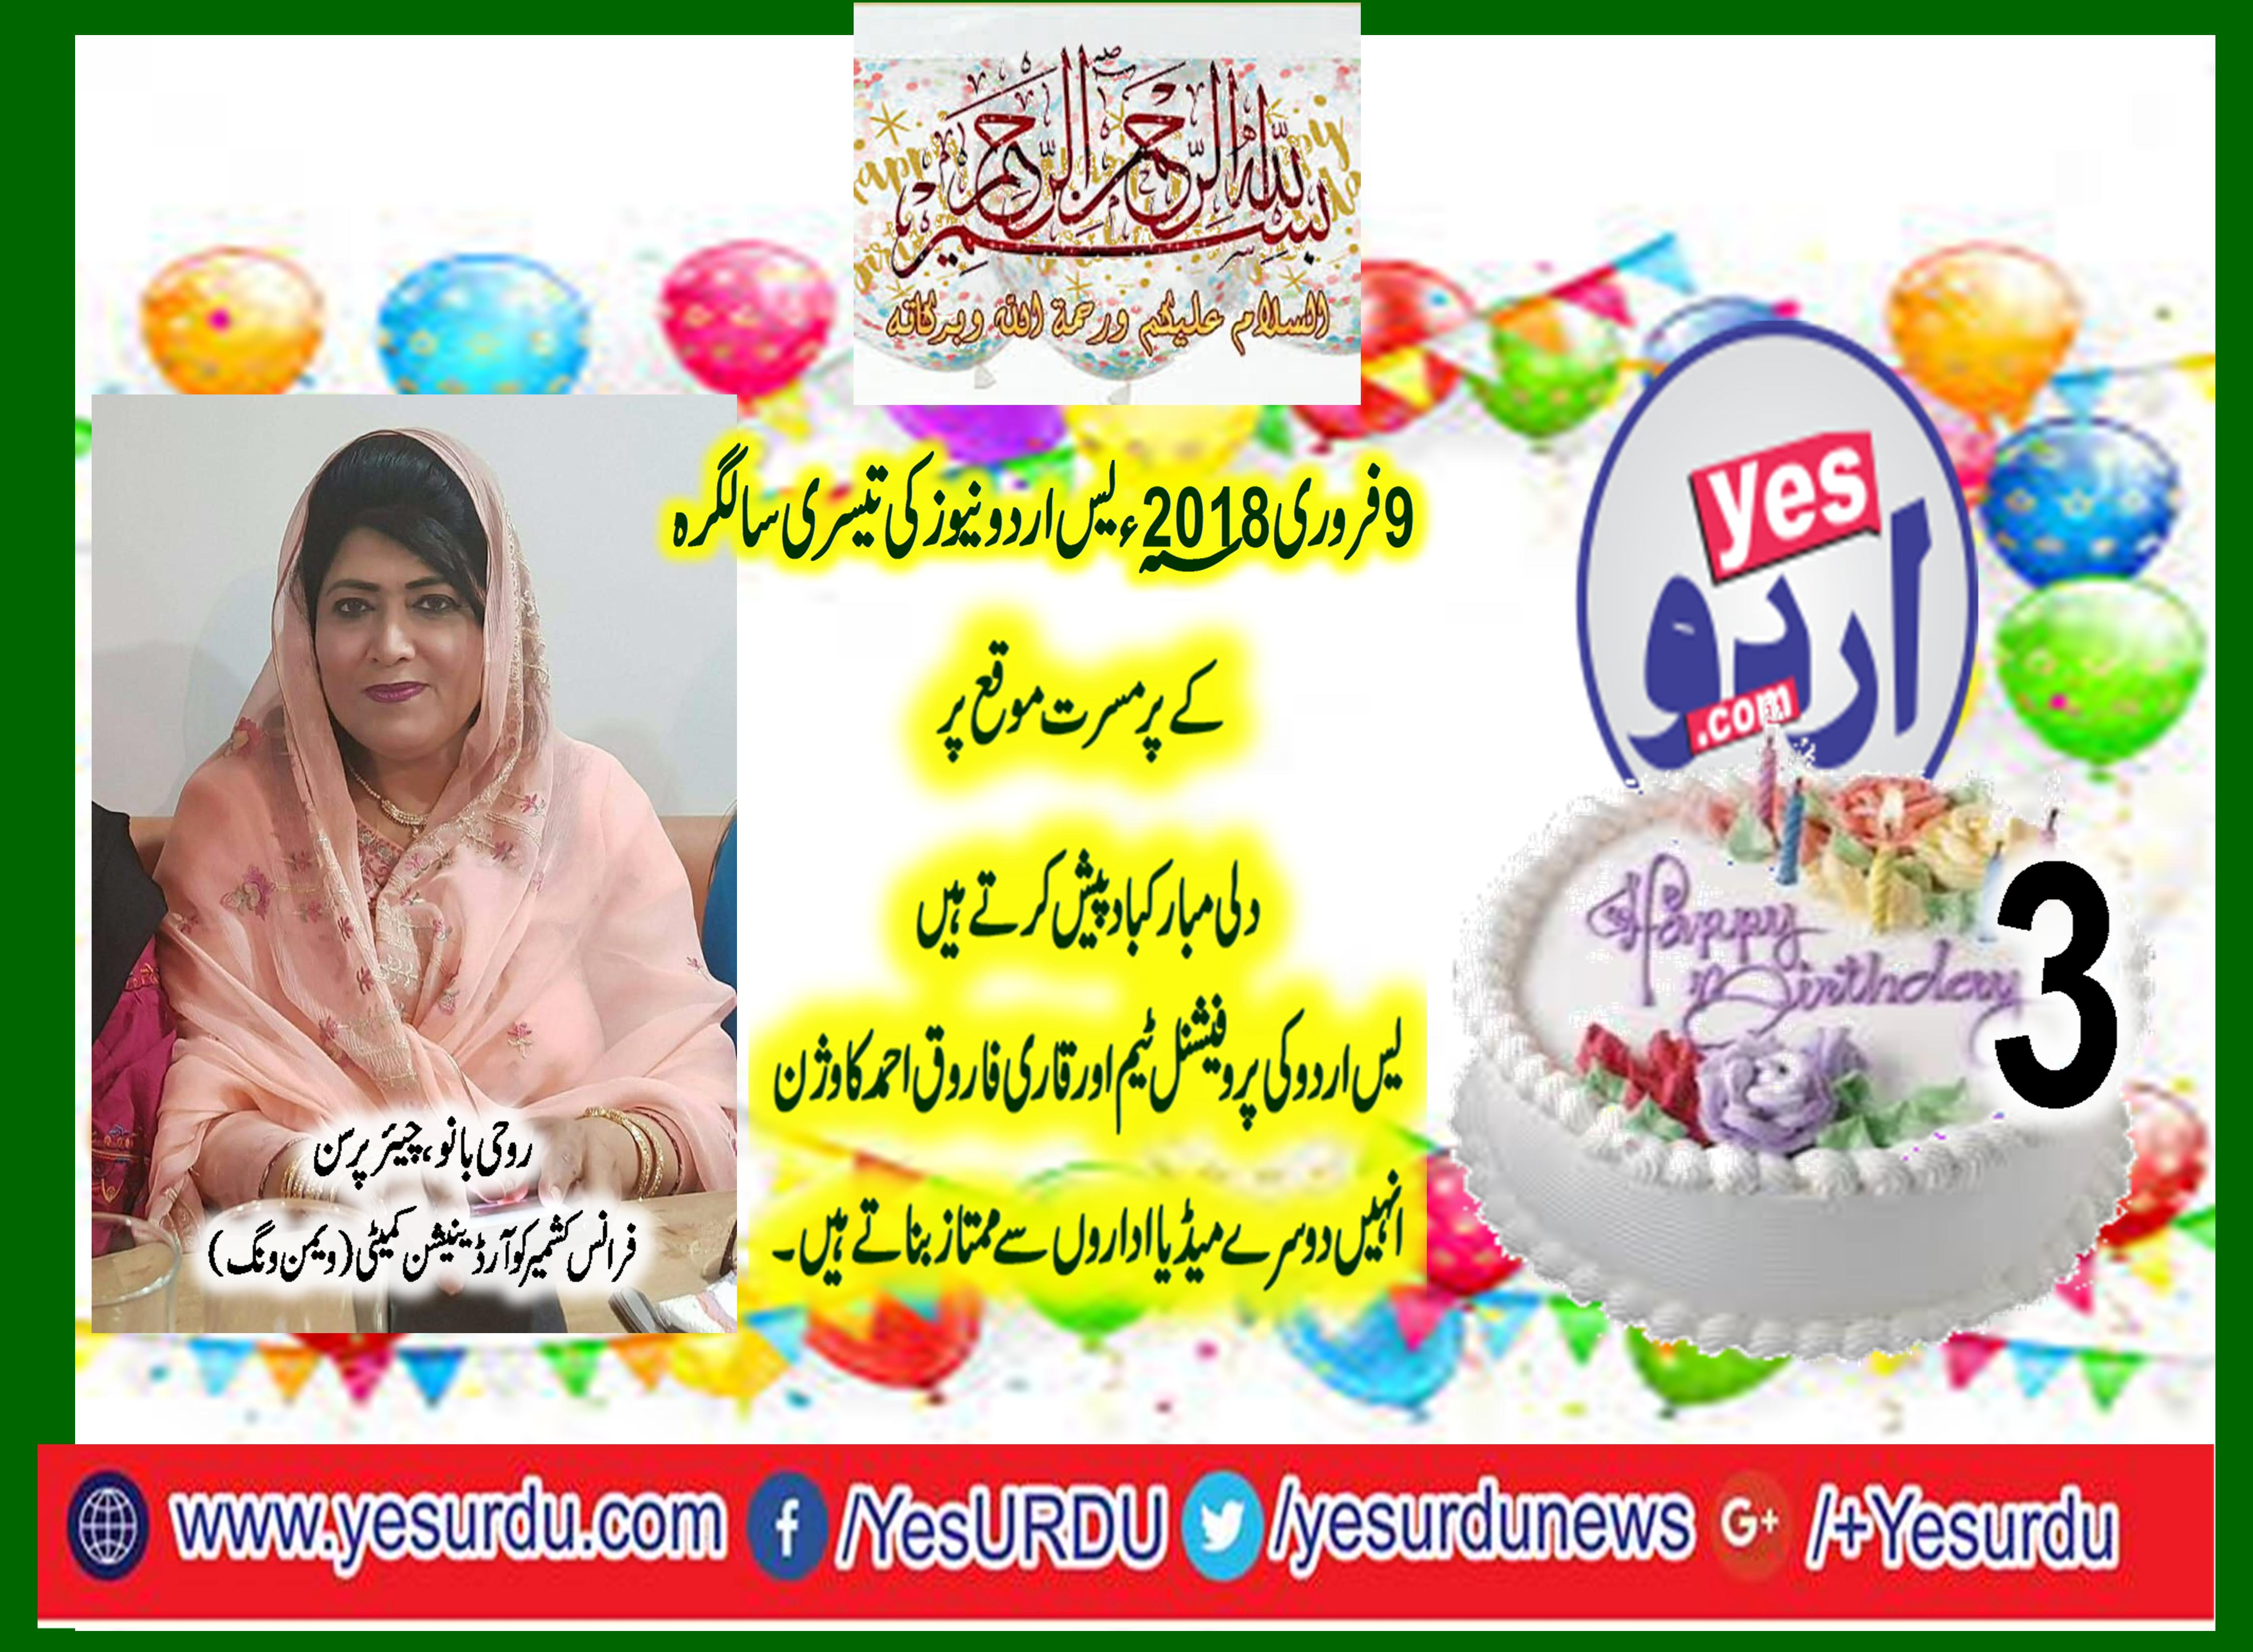 Roohi bano, chairperson, kashmir, coordination, committee, women, wing, France, congratulated, yesurdu, team, on, his, third, anniversary